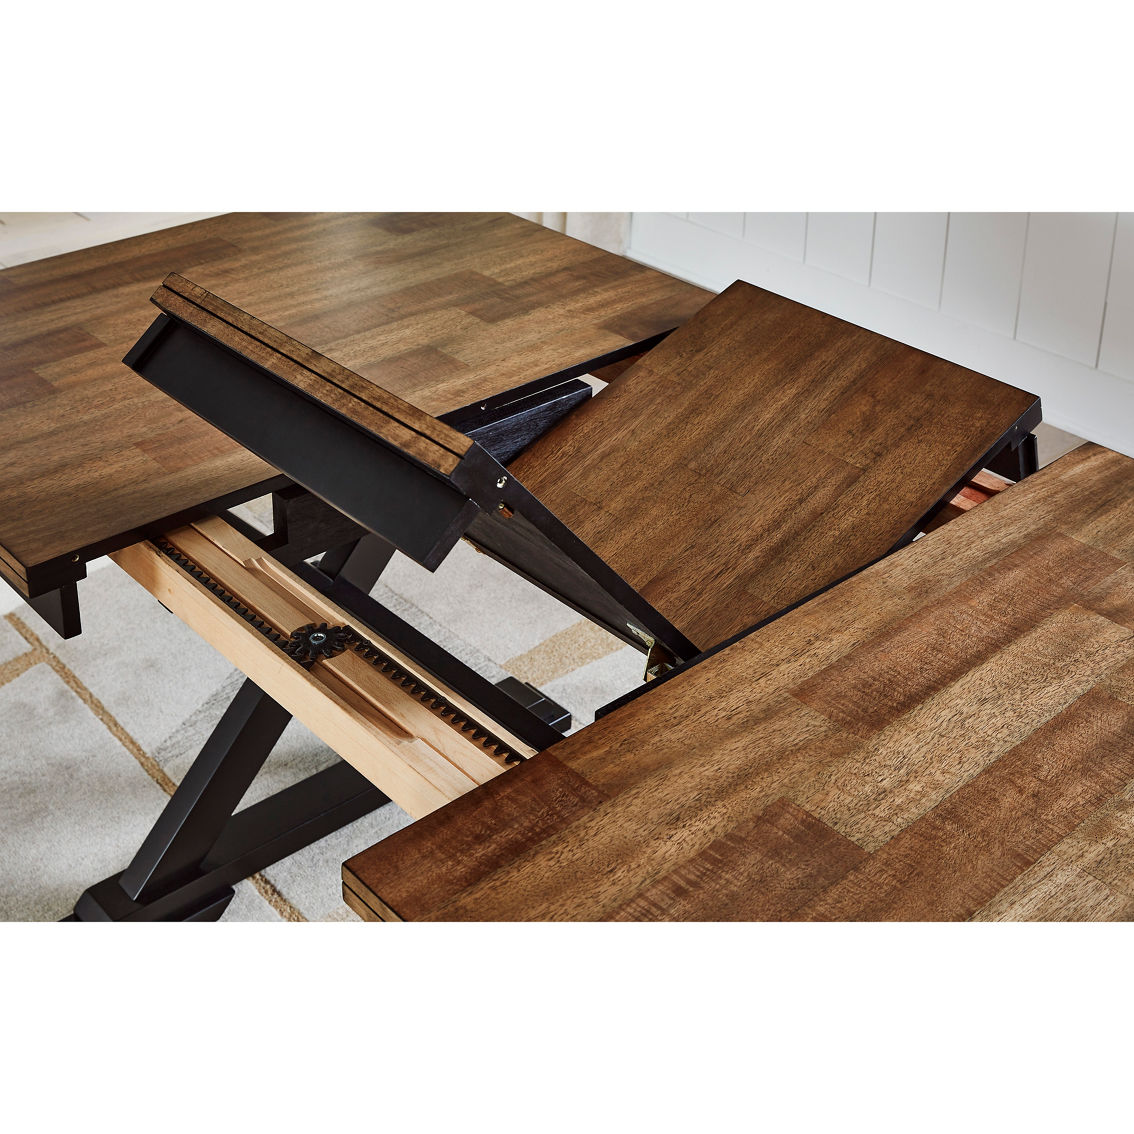 Signature Design by Ashley Wildenauer Dining Extension Table - Image 2 of 4